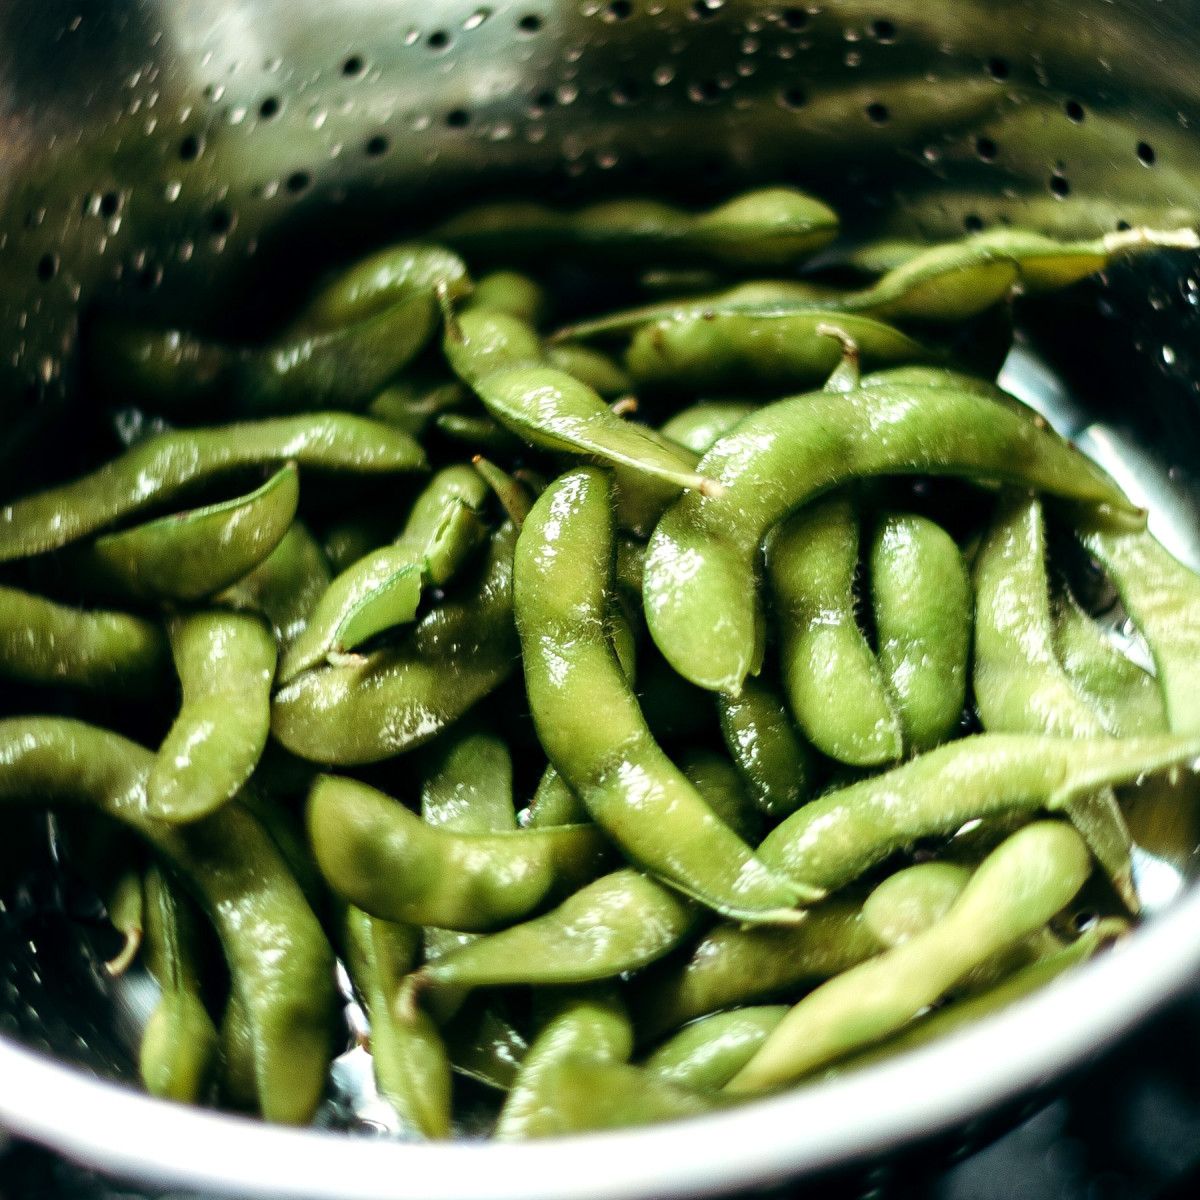 Edamame, great as a snack or in recipes.